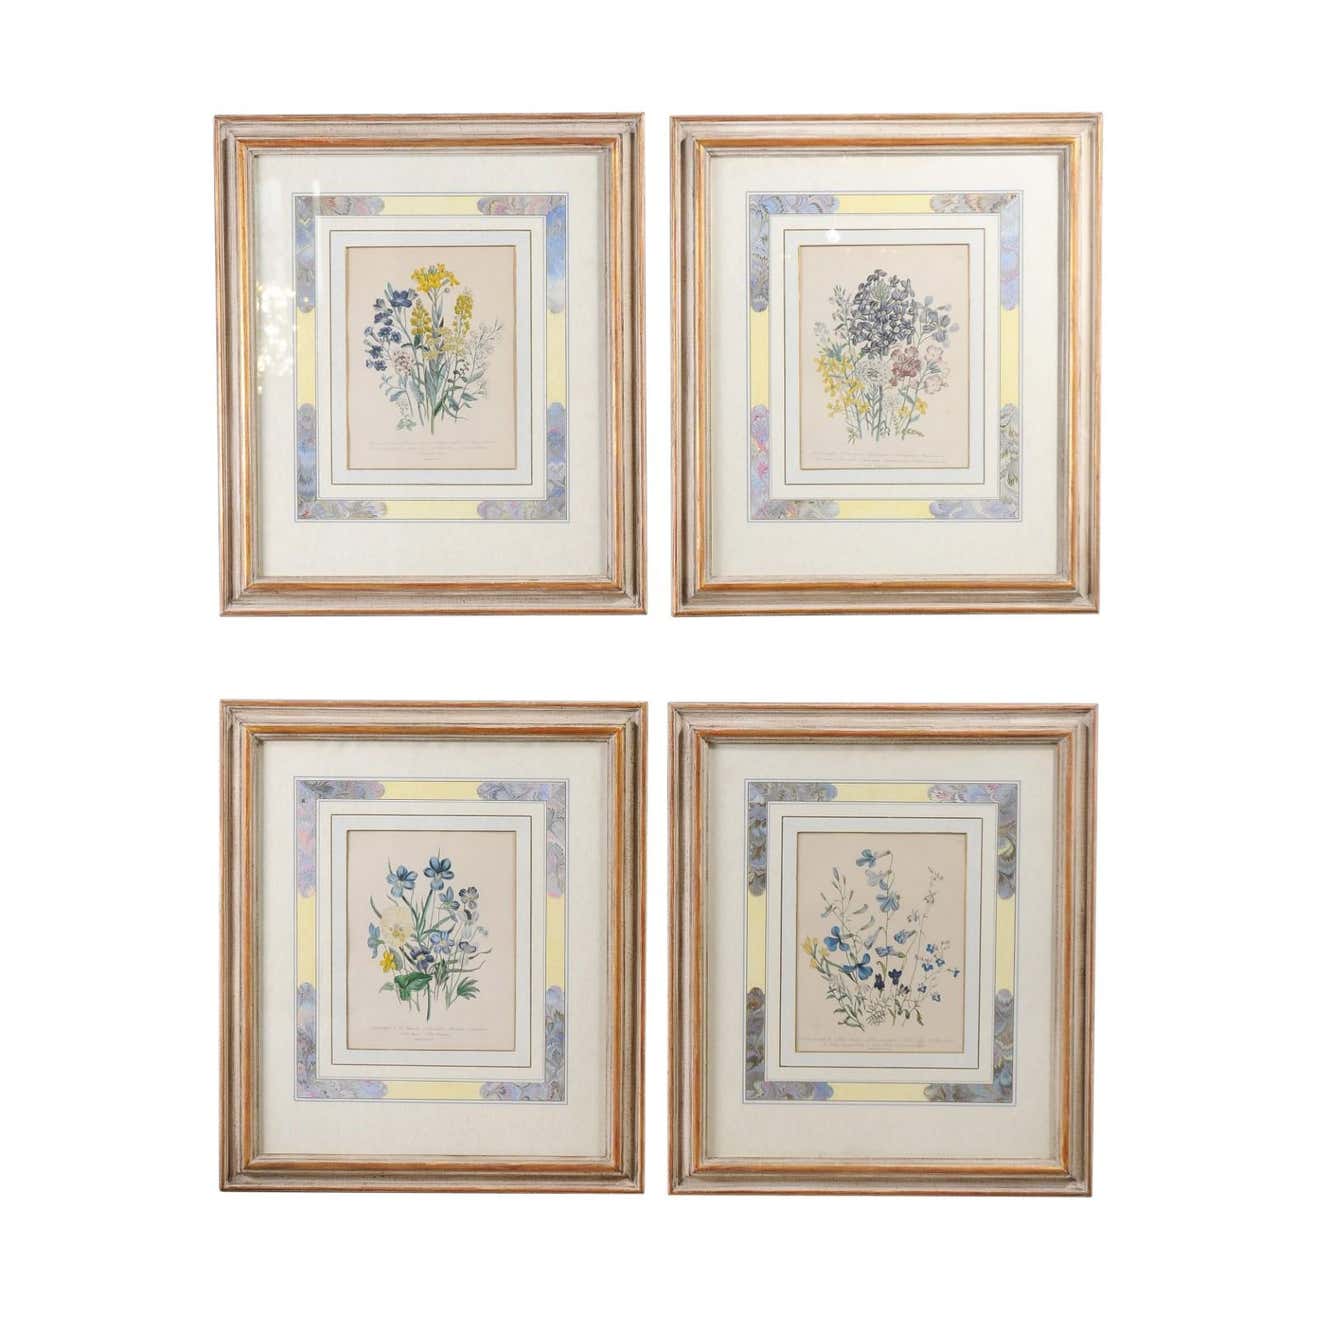 Two Pairs of Original English Hand-Colored Floral Lithographs by Jane London